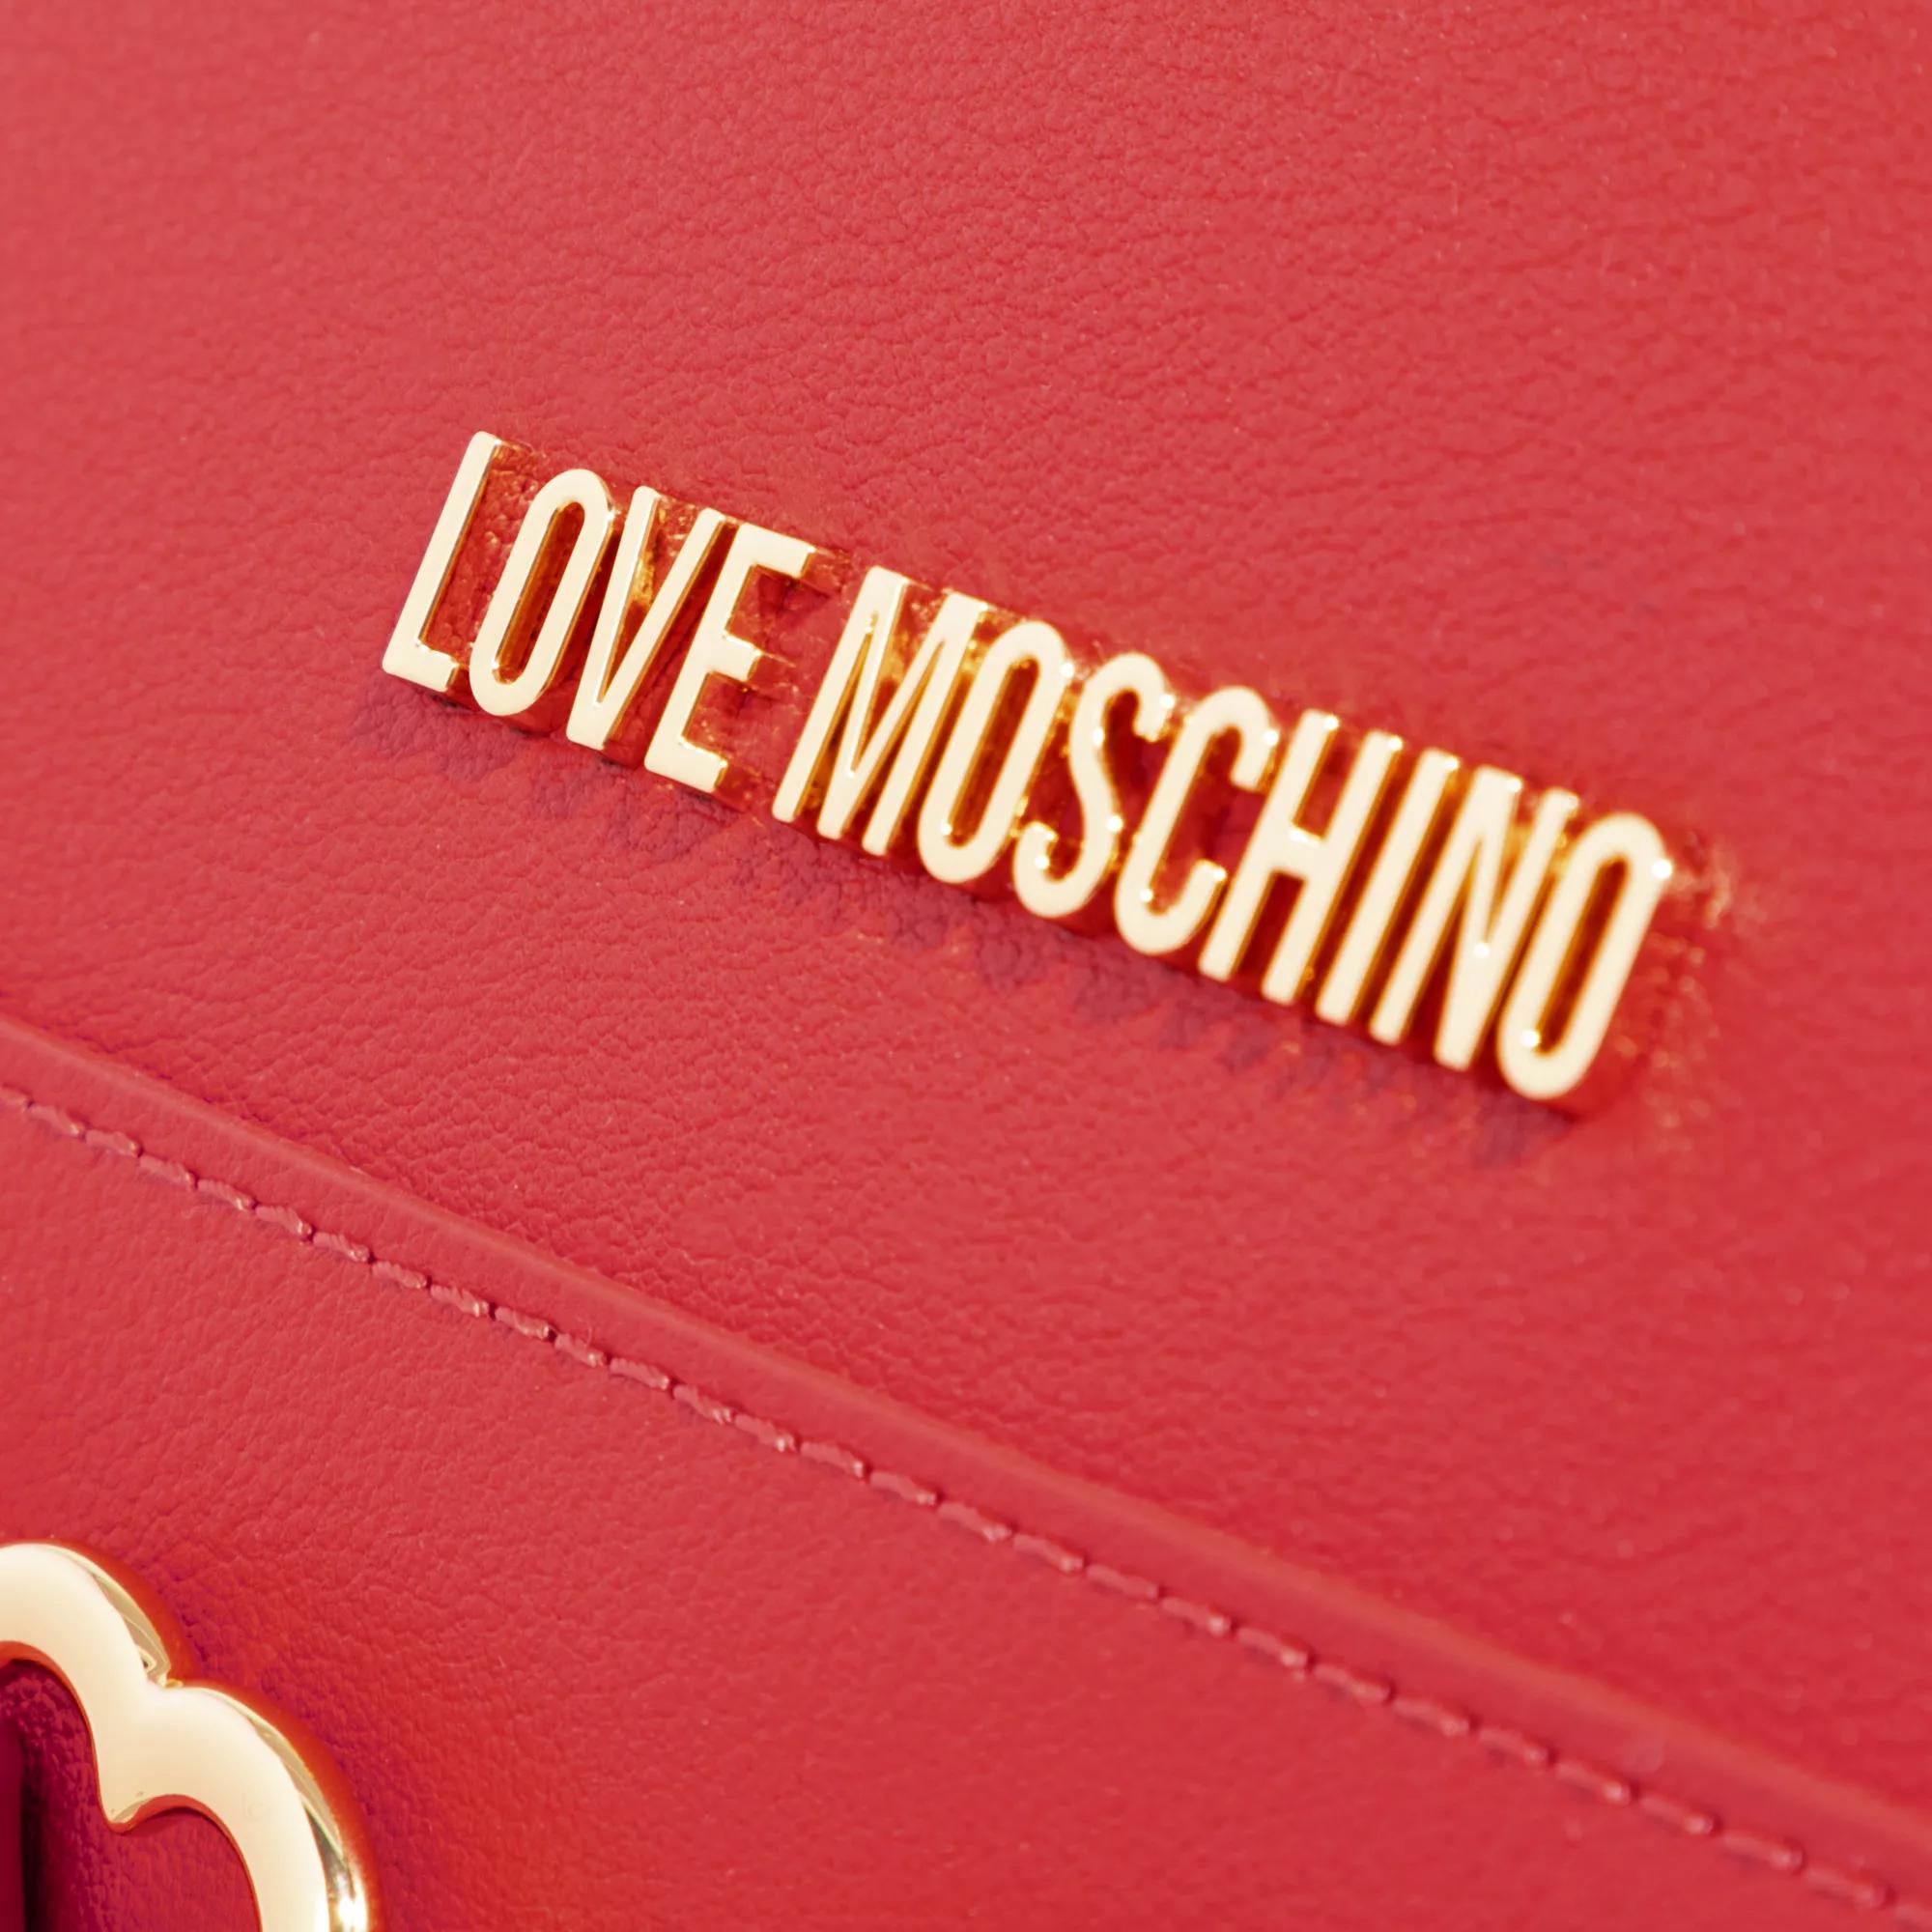 Love Moschino Totes Heart Handle Bag in rood